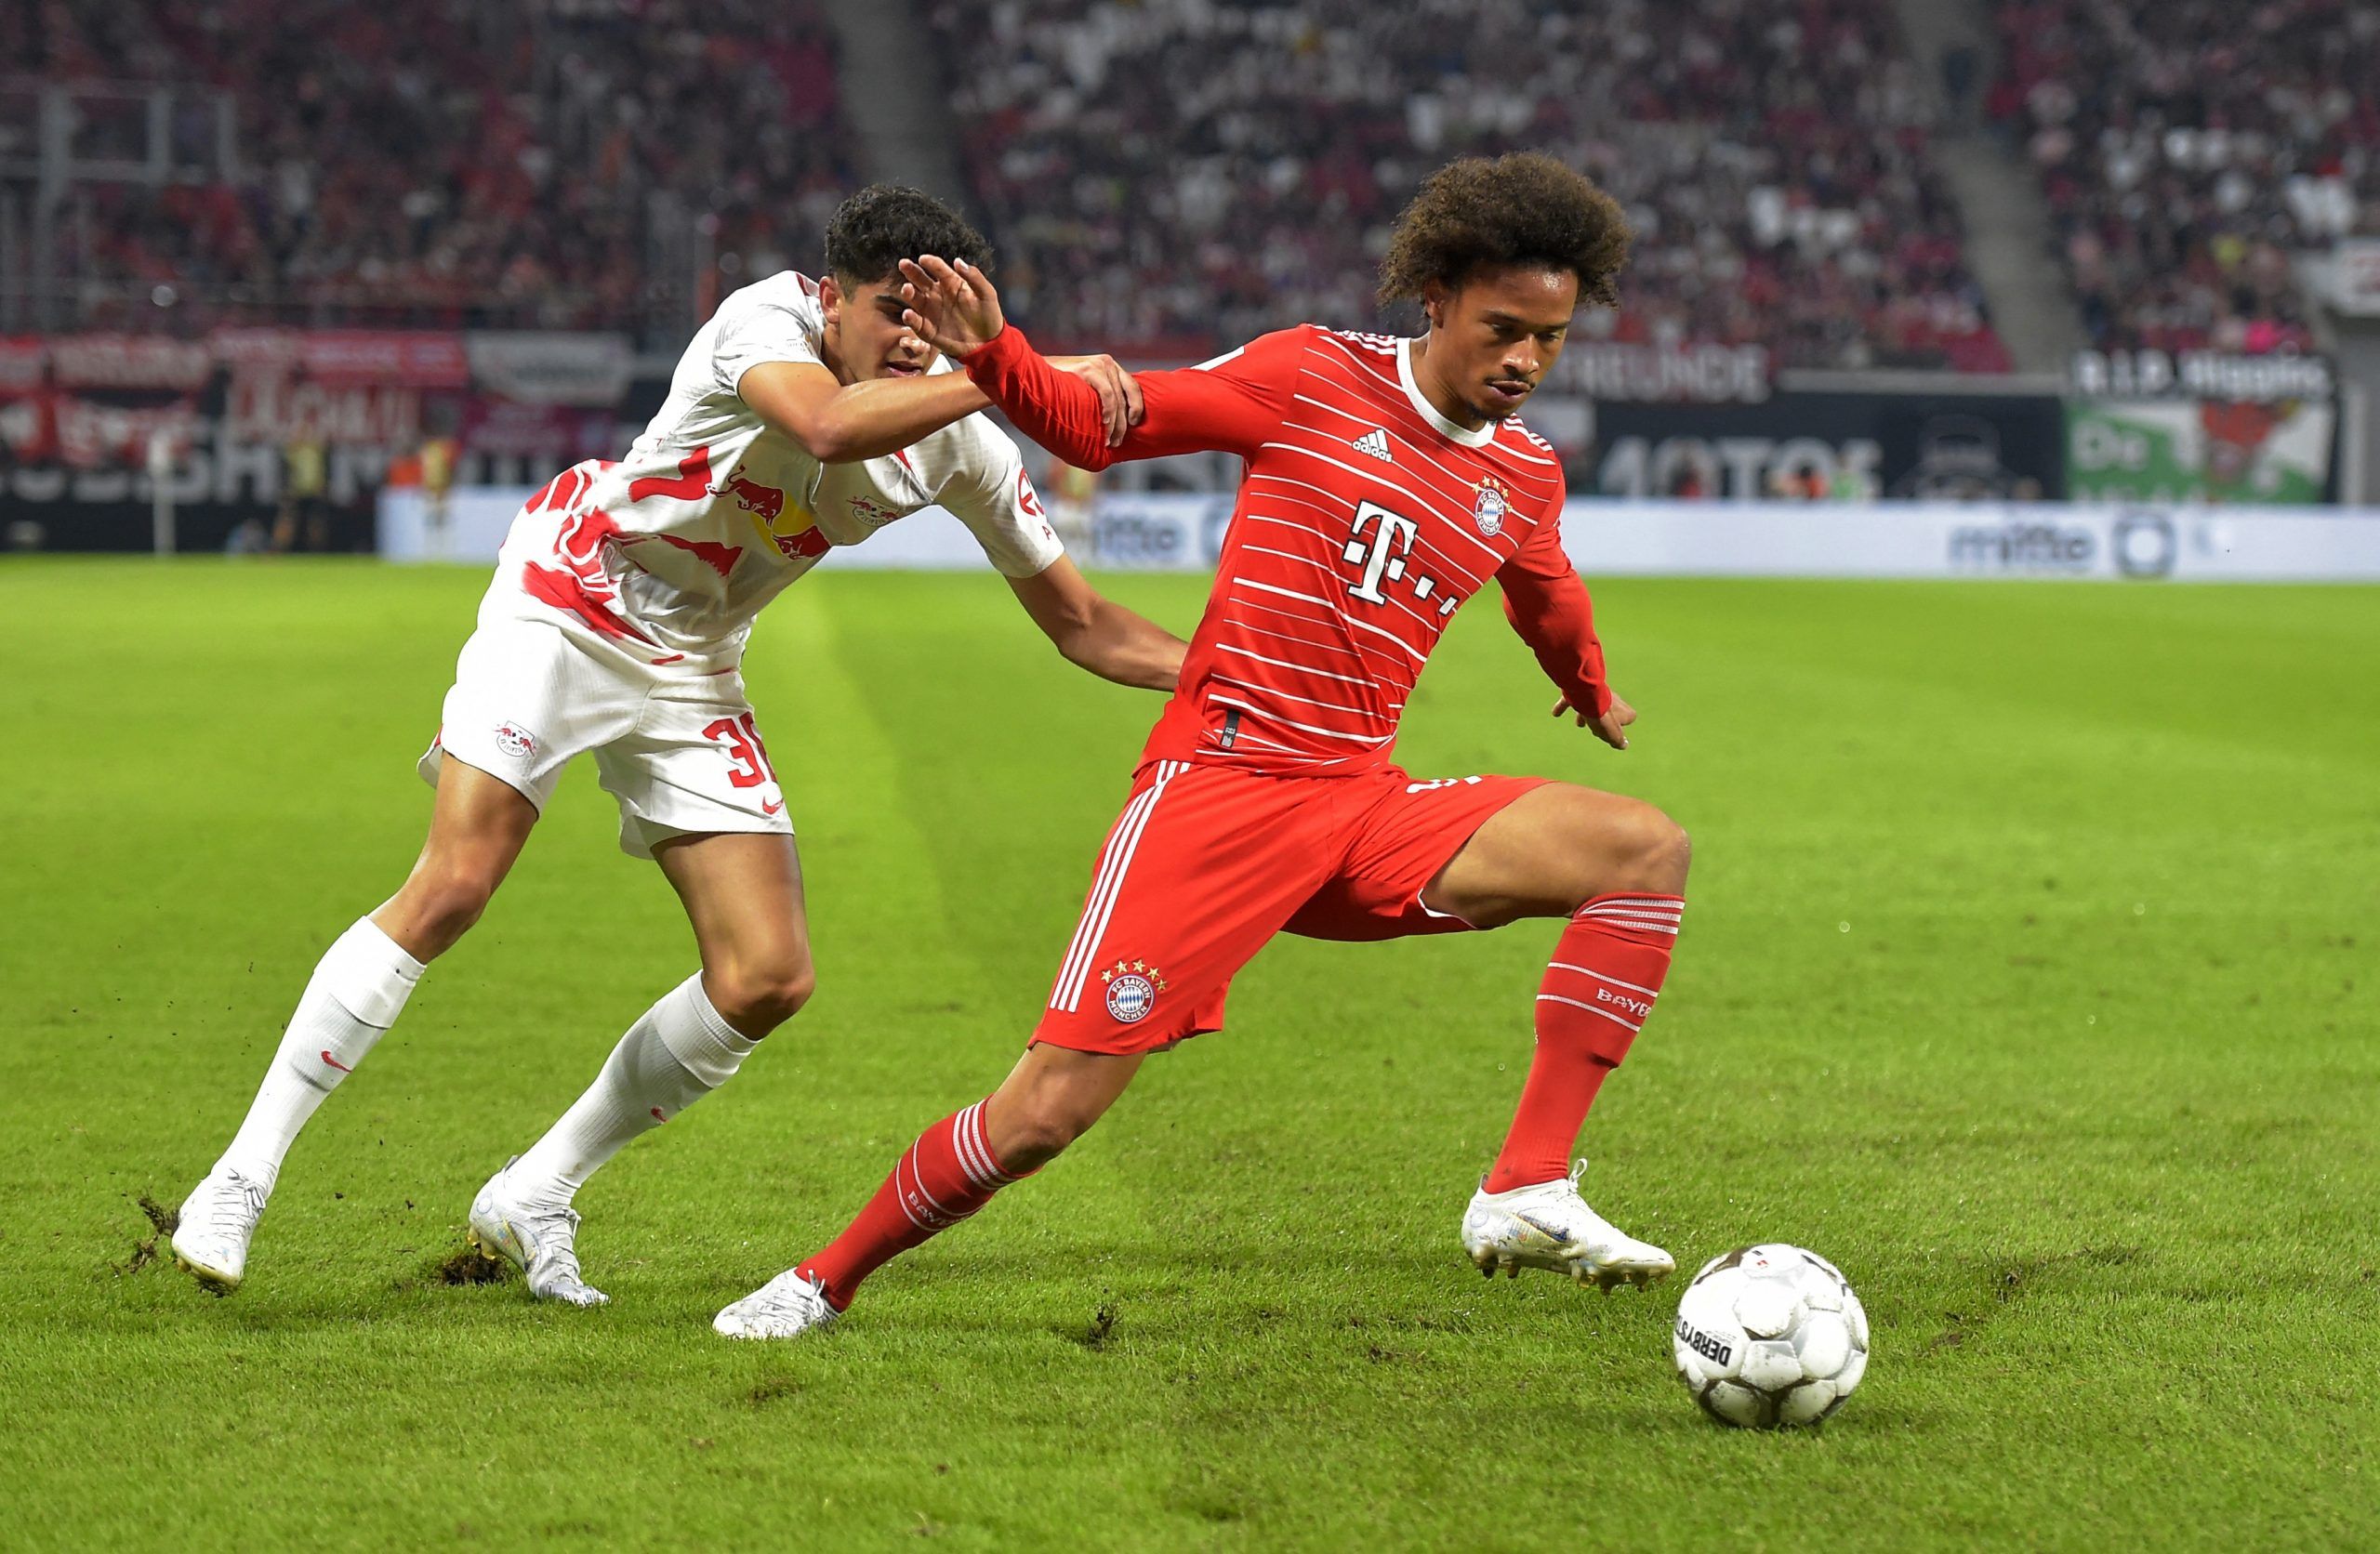 Soccer Football - DFL Super Cup - RB Leipzig v Bayern Munich - Red Bull Arena, Leipzig, Germany - July 30, 2022  RB Leipzig's Hugo Novoa in action with Bayern Munich's Leroy Sane REUTERS/Matthias Rietschel DFL REGULATIONS PROHIBIT ANY USE OF PHOTOGRAPHS AS IMAGE SEQUENCES AND/OR QUASI-VIDEO.